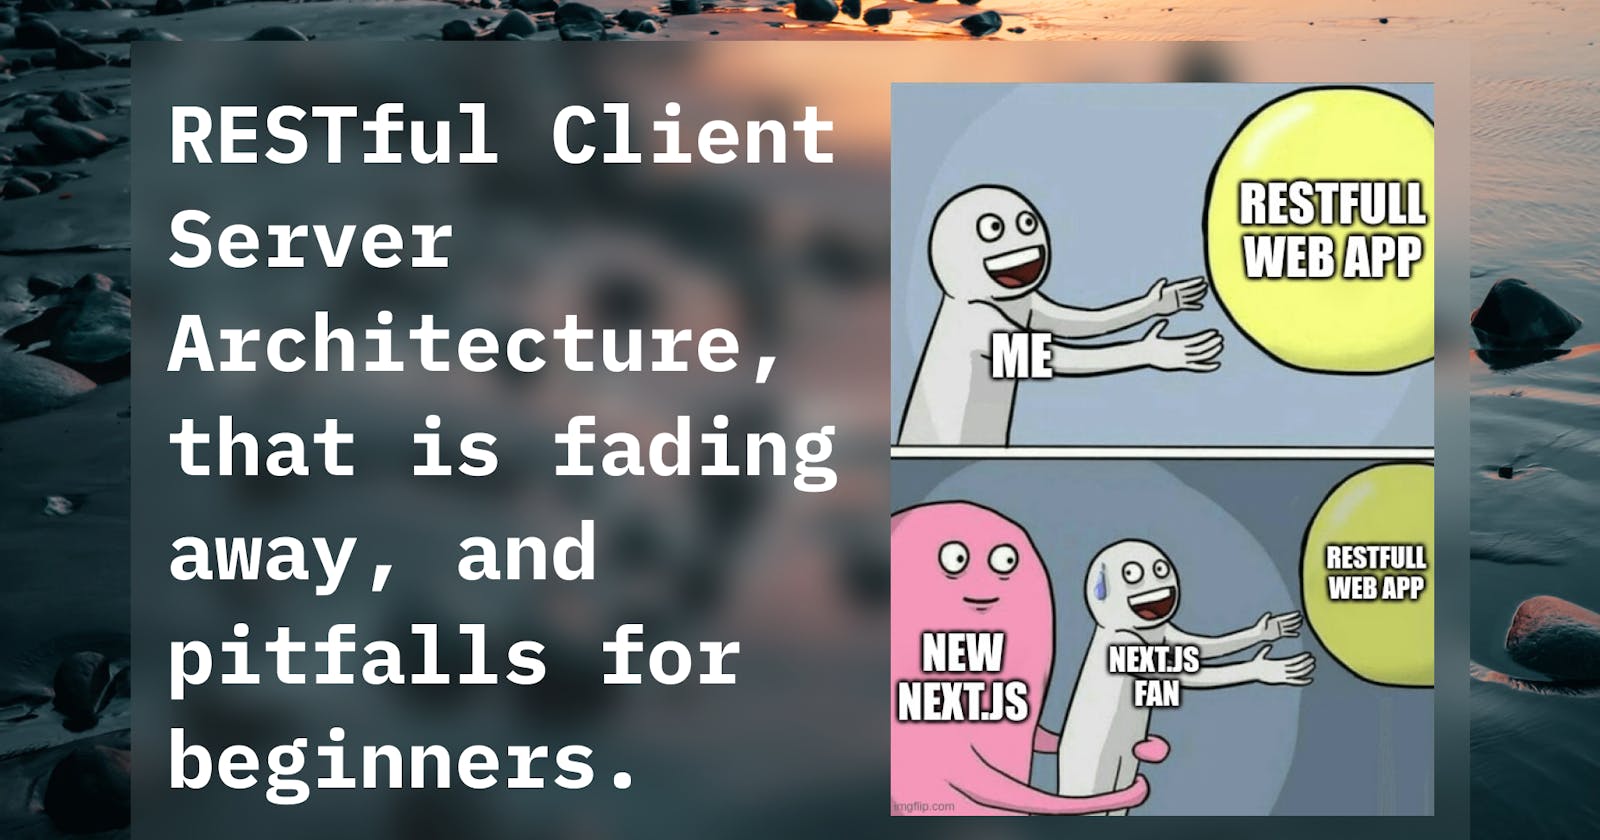 RESTful Client Server Architecture, that is fading away, and pitfalls for beginners.